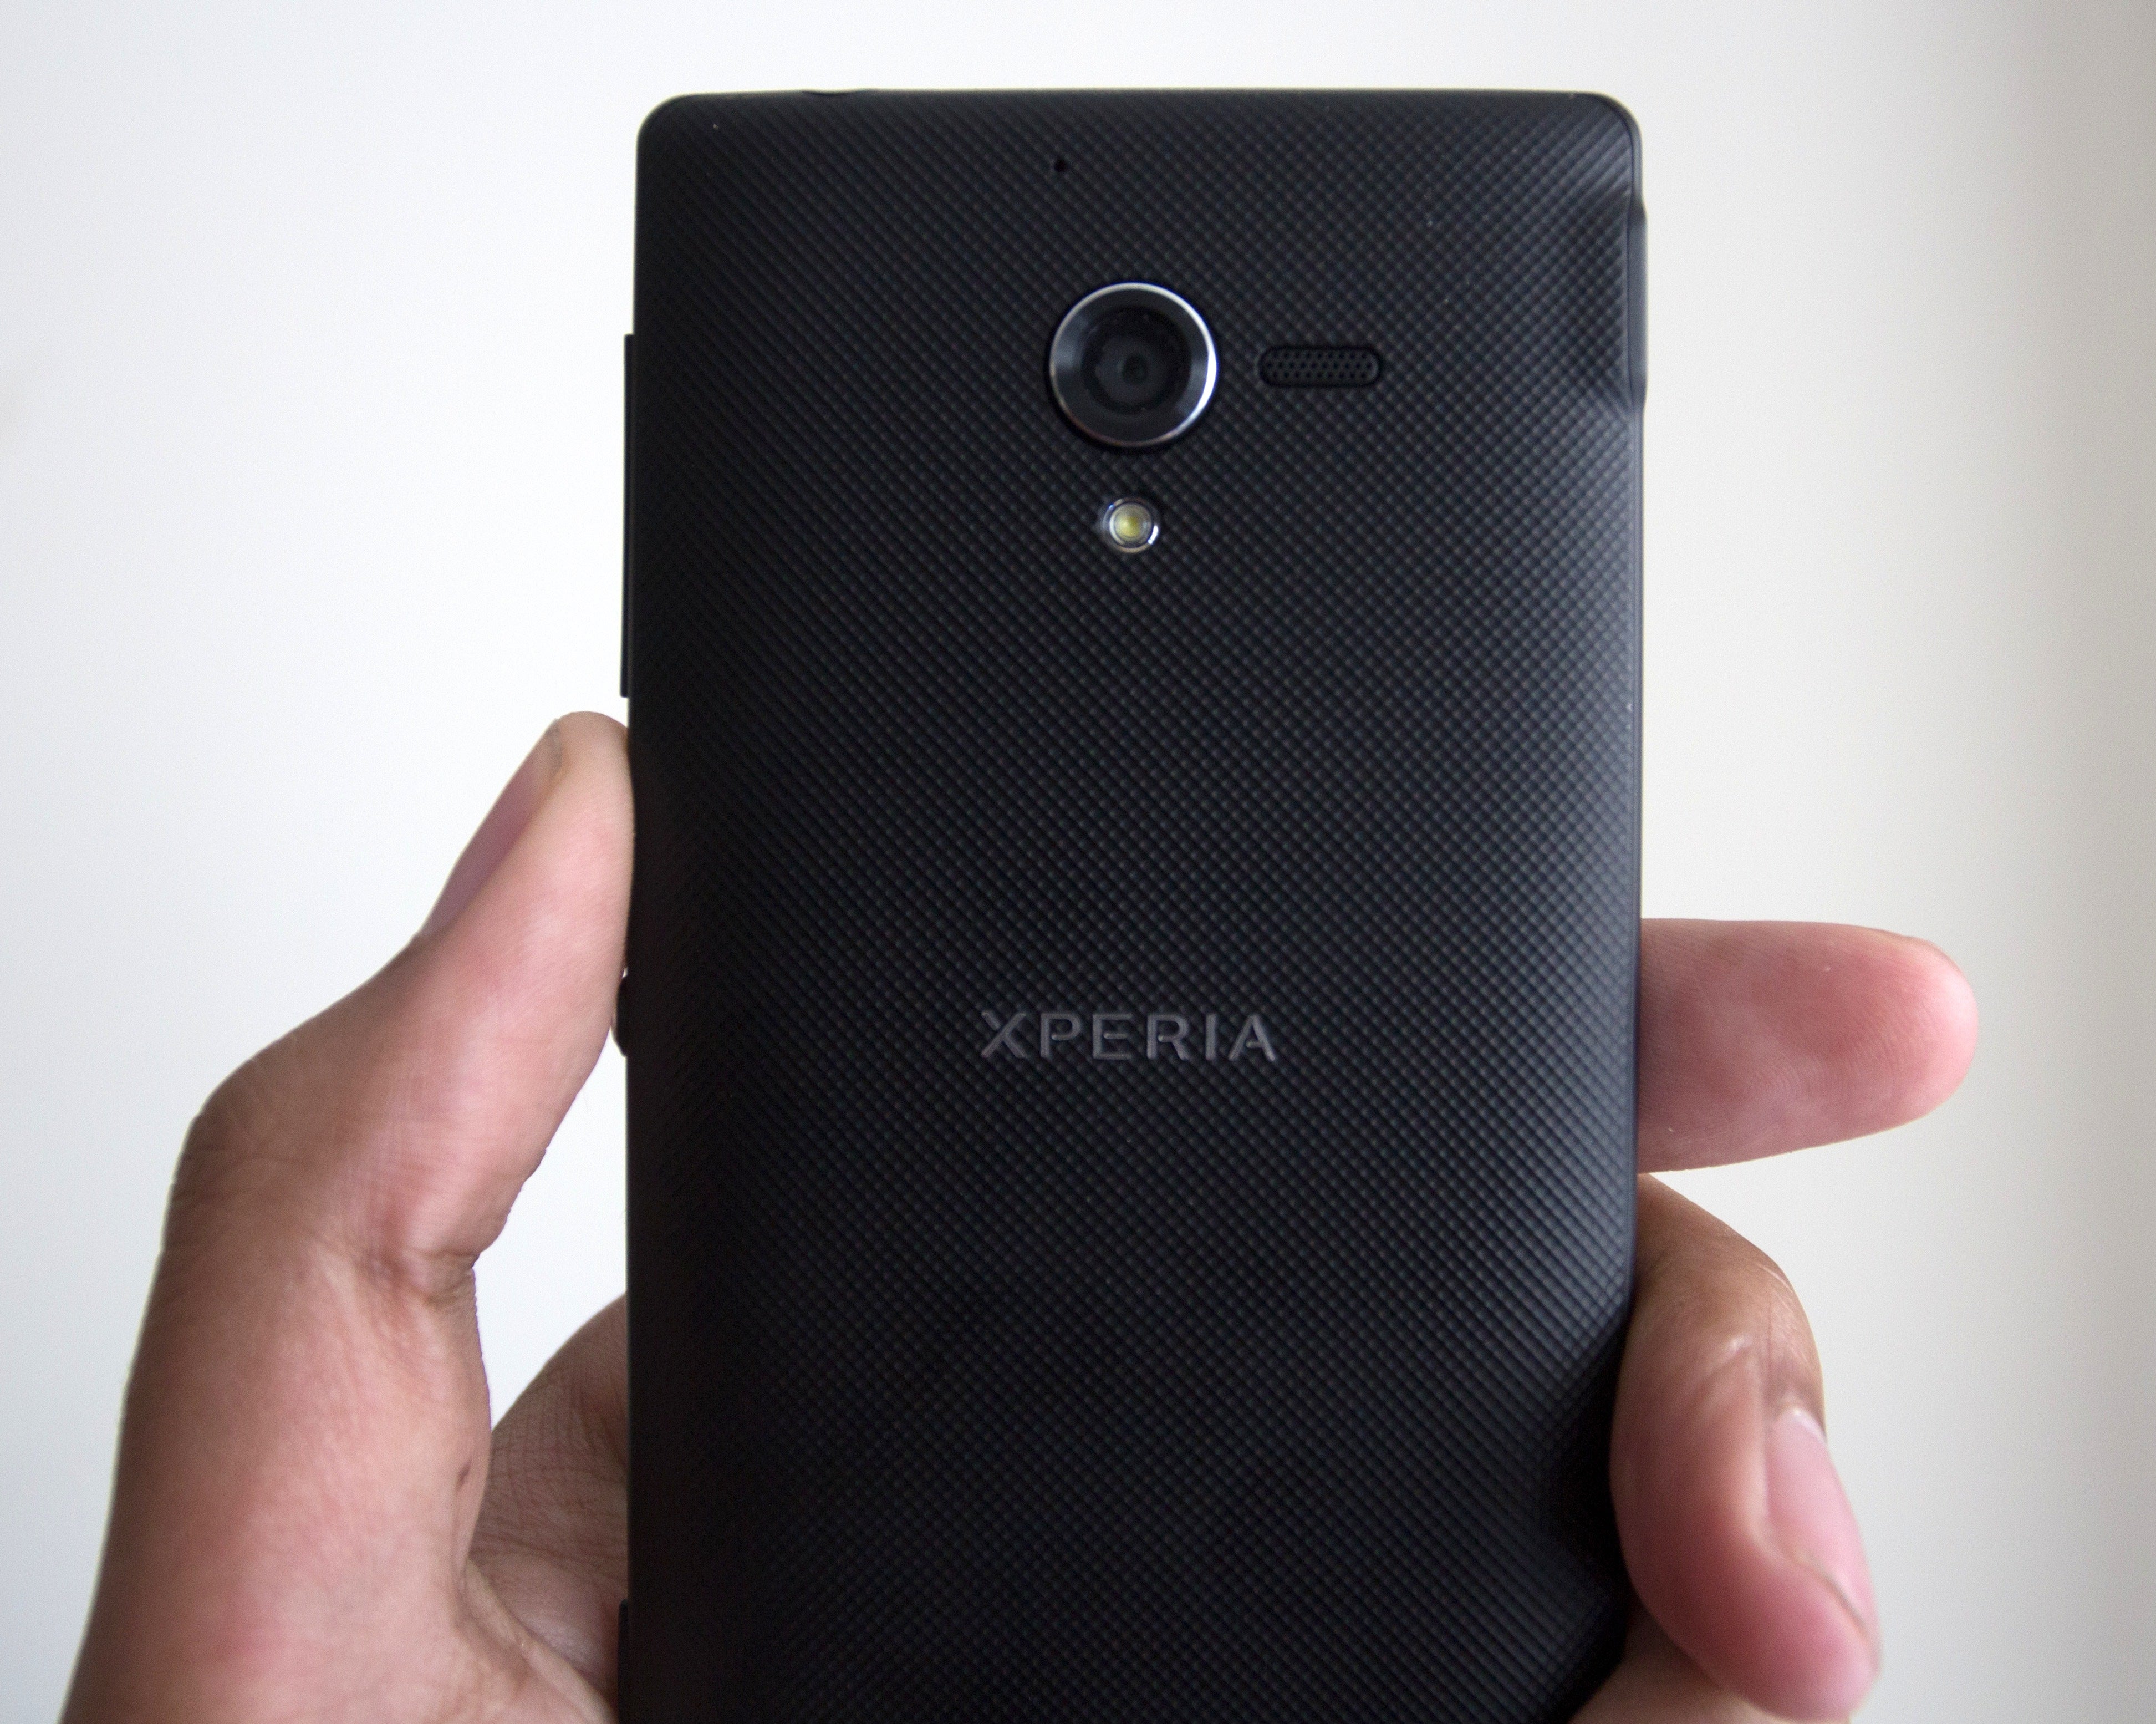 Review: Sony Xperia ZL is about as exciting as getting ...